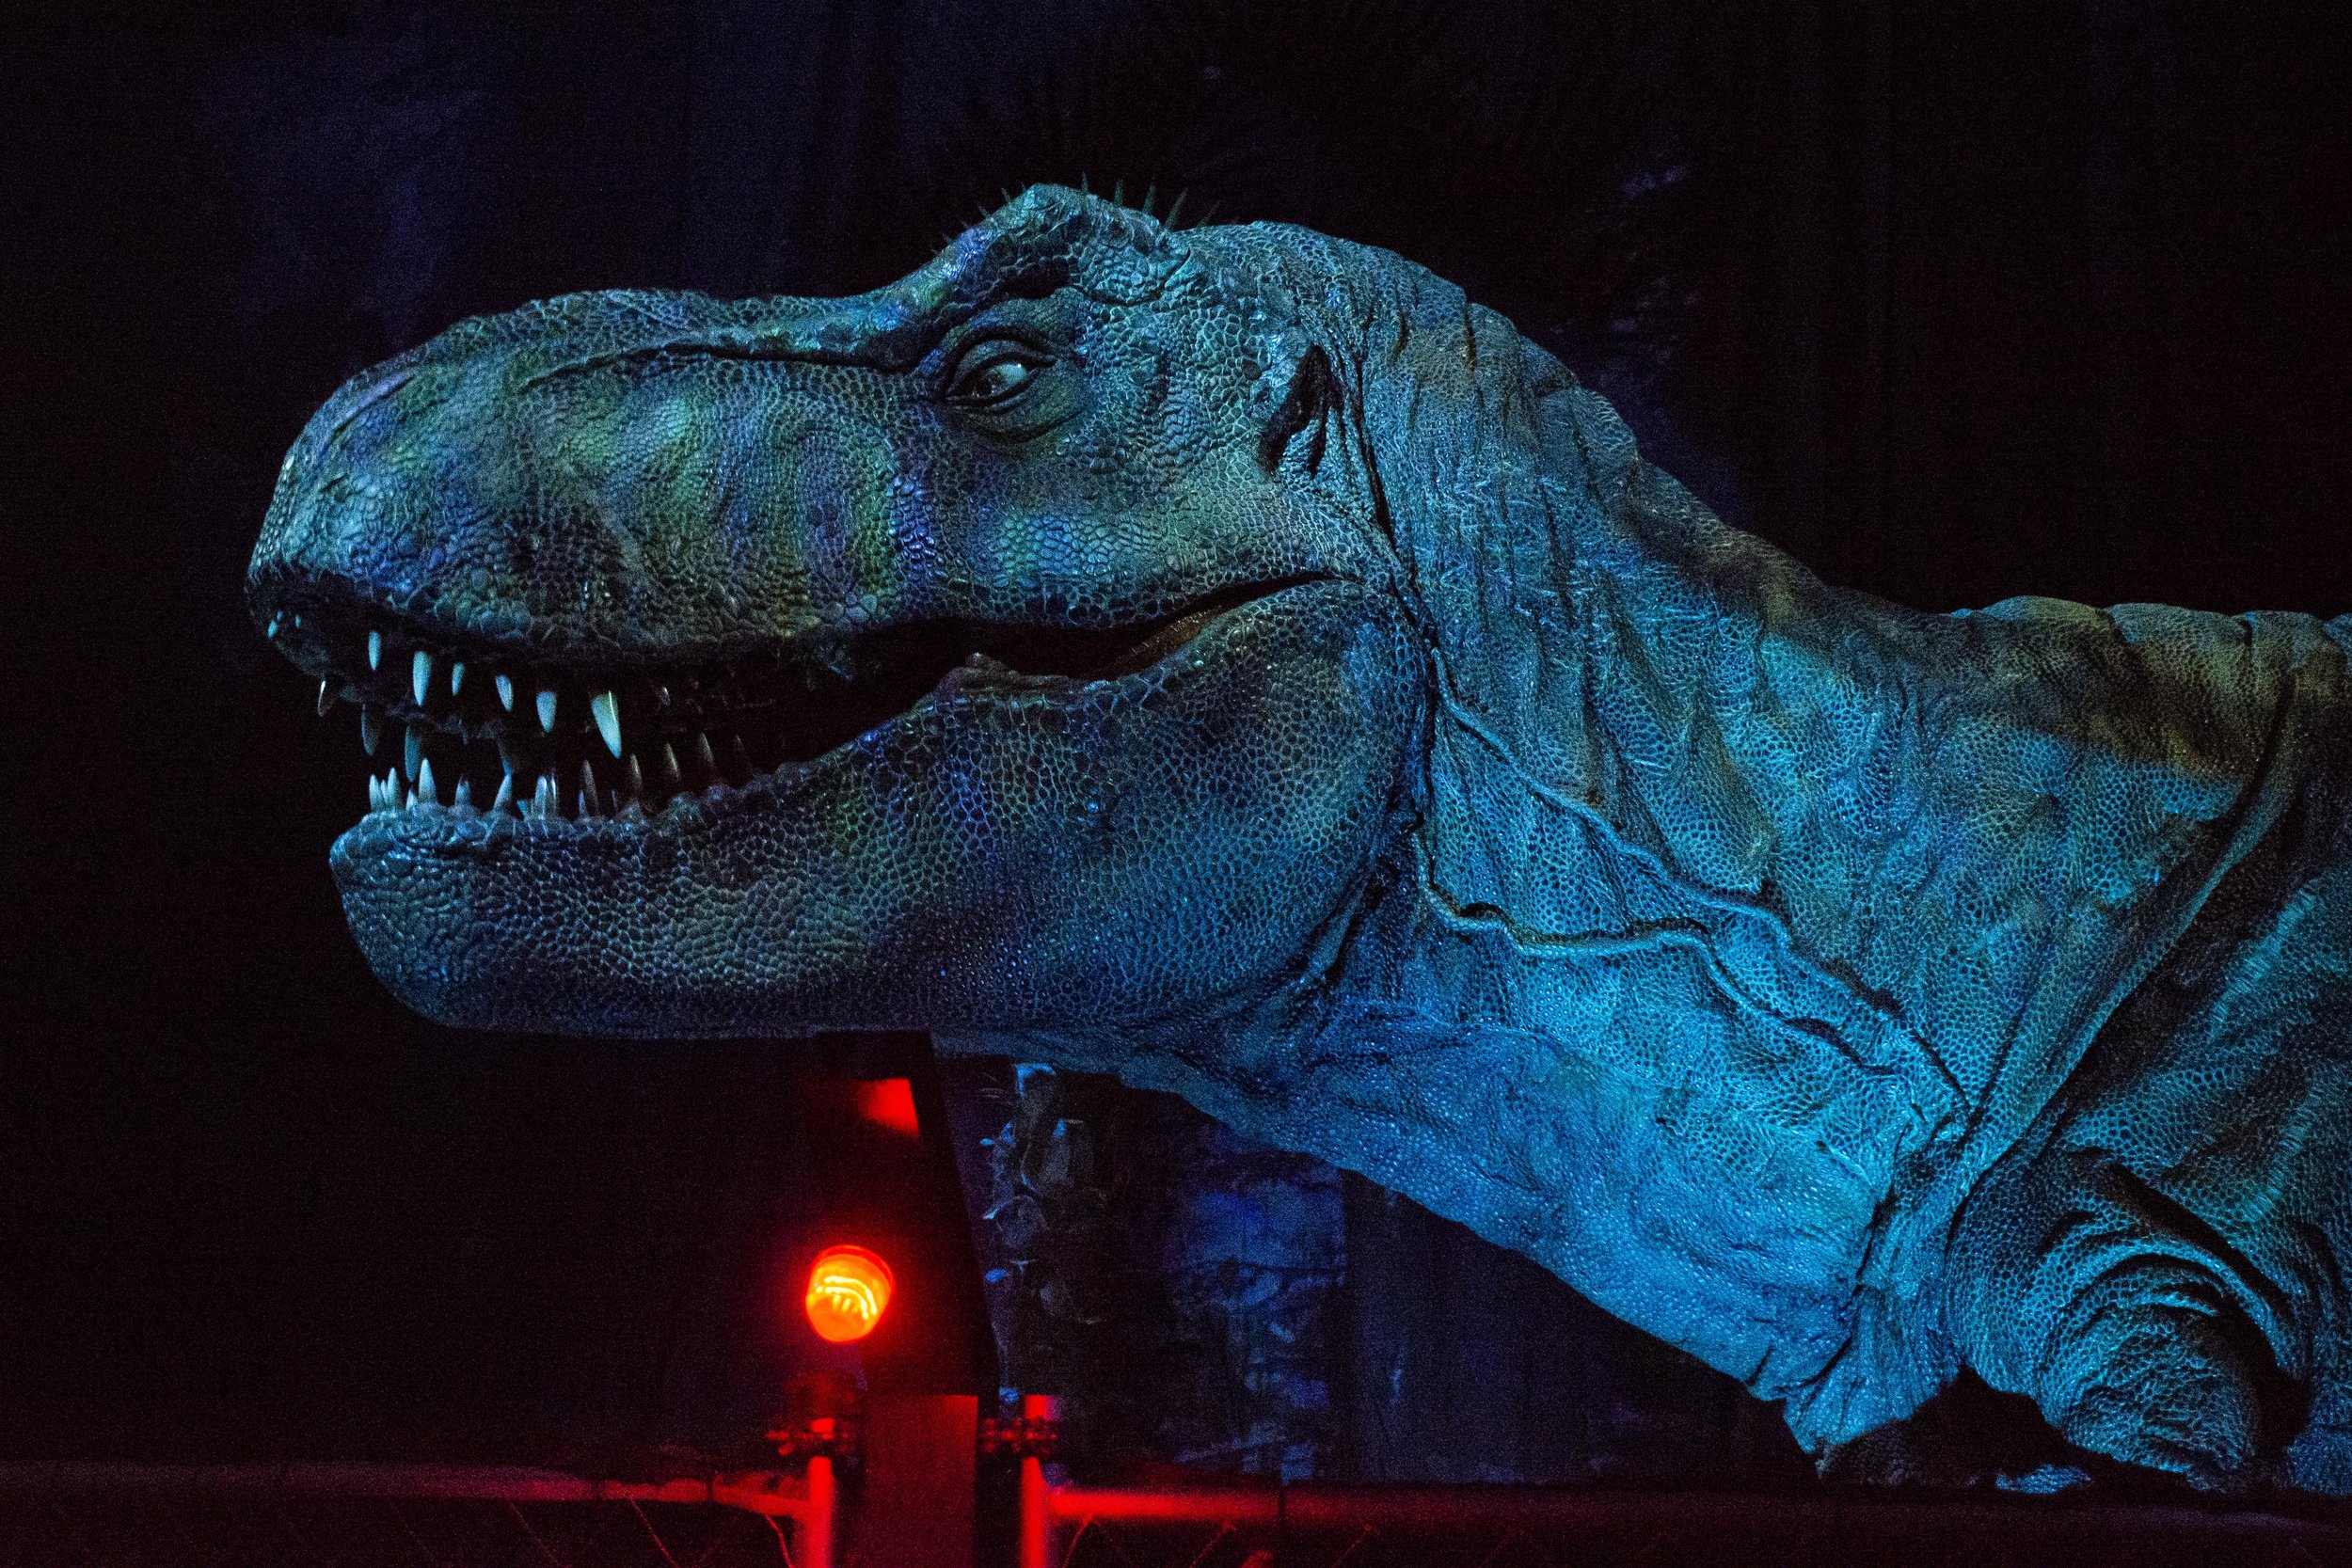 Jurassic World The Exhibition Stomps Into London With Roarsome Preview Night — The Jurassic Park 